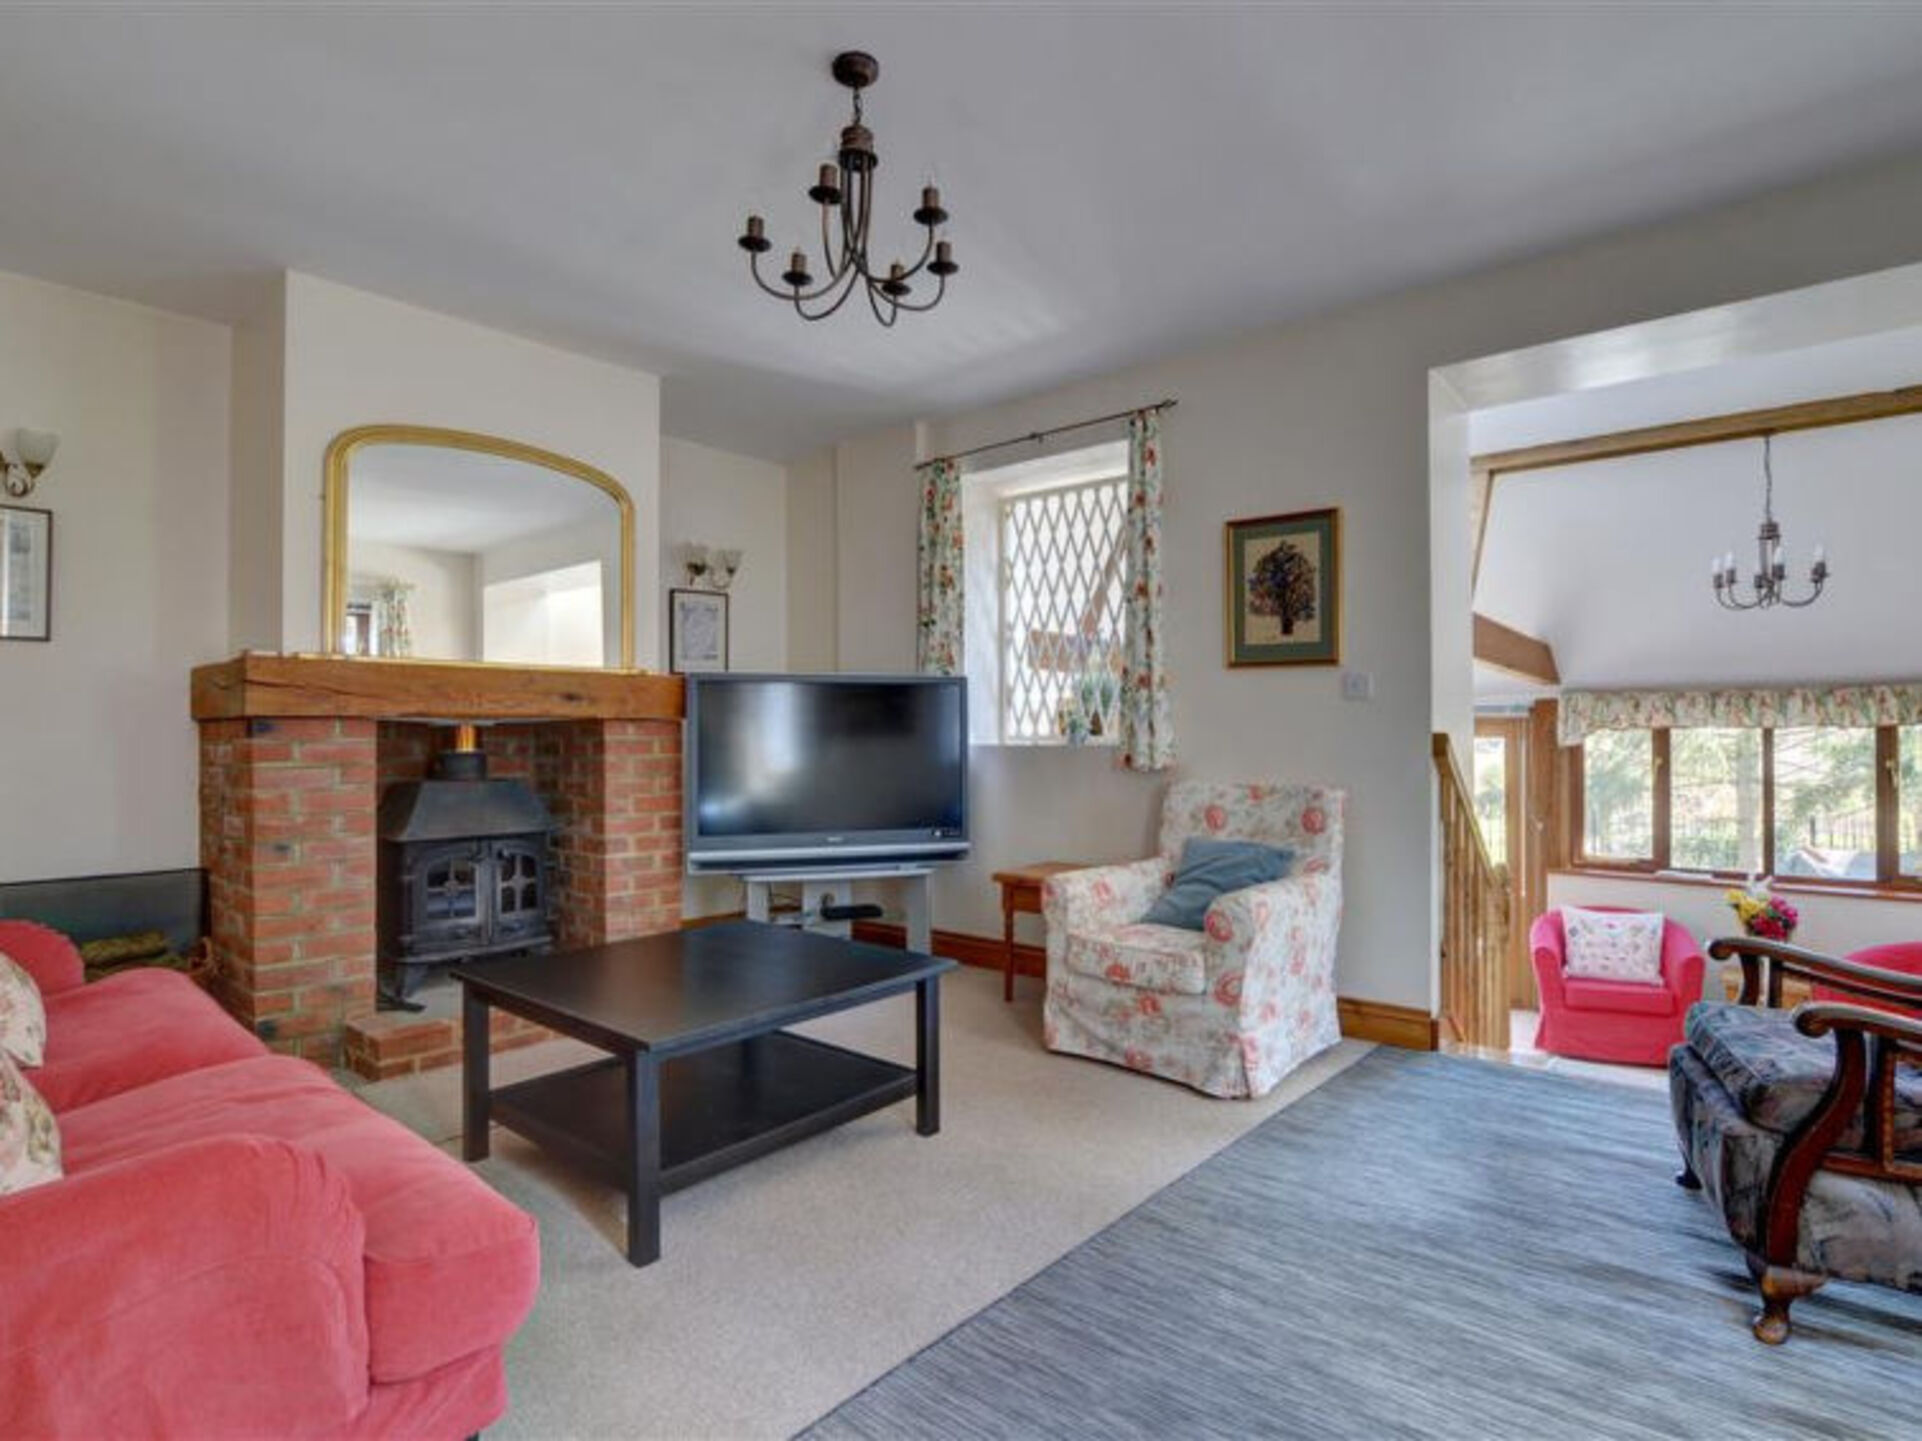 Property Image 2 - The Ultimate Villa in an Ideal Location, England Villa 1154